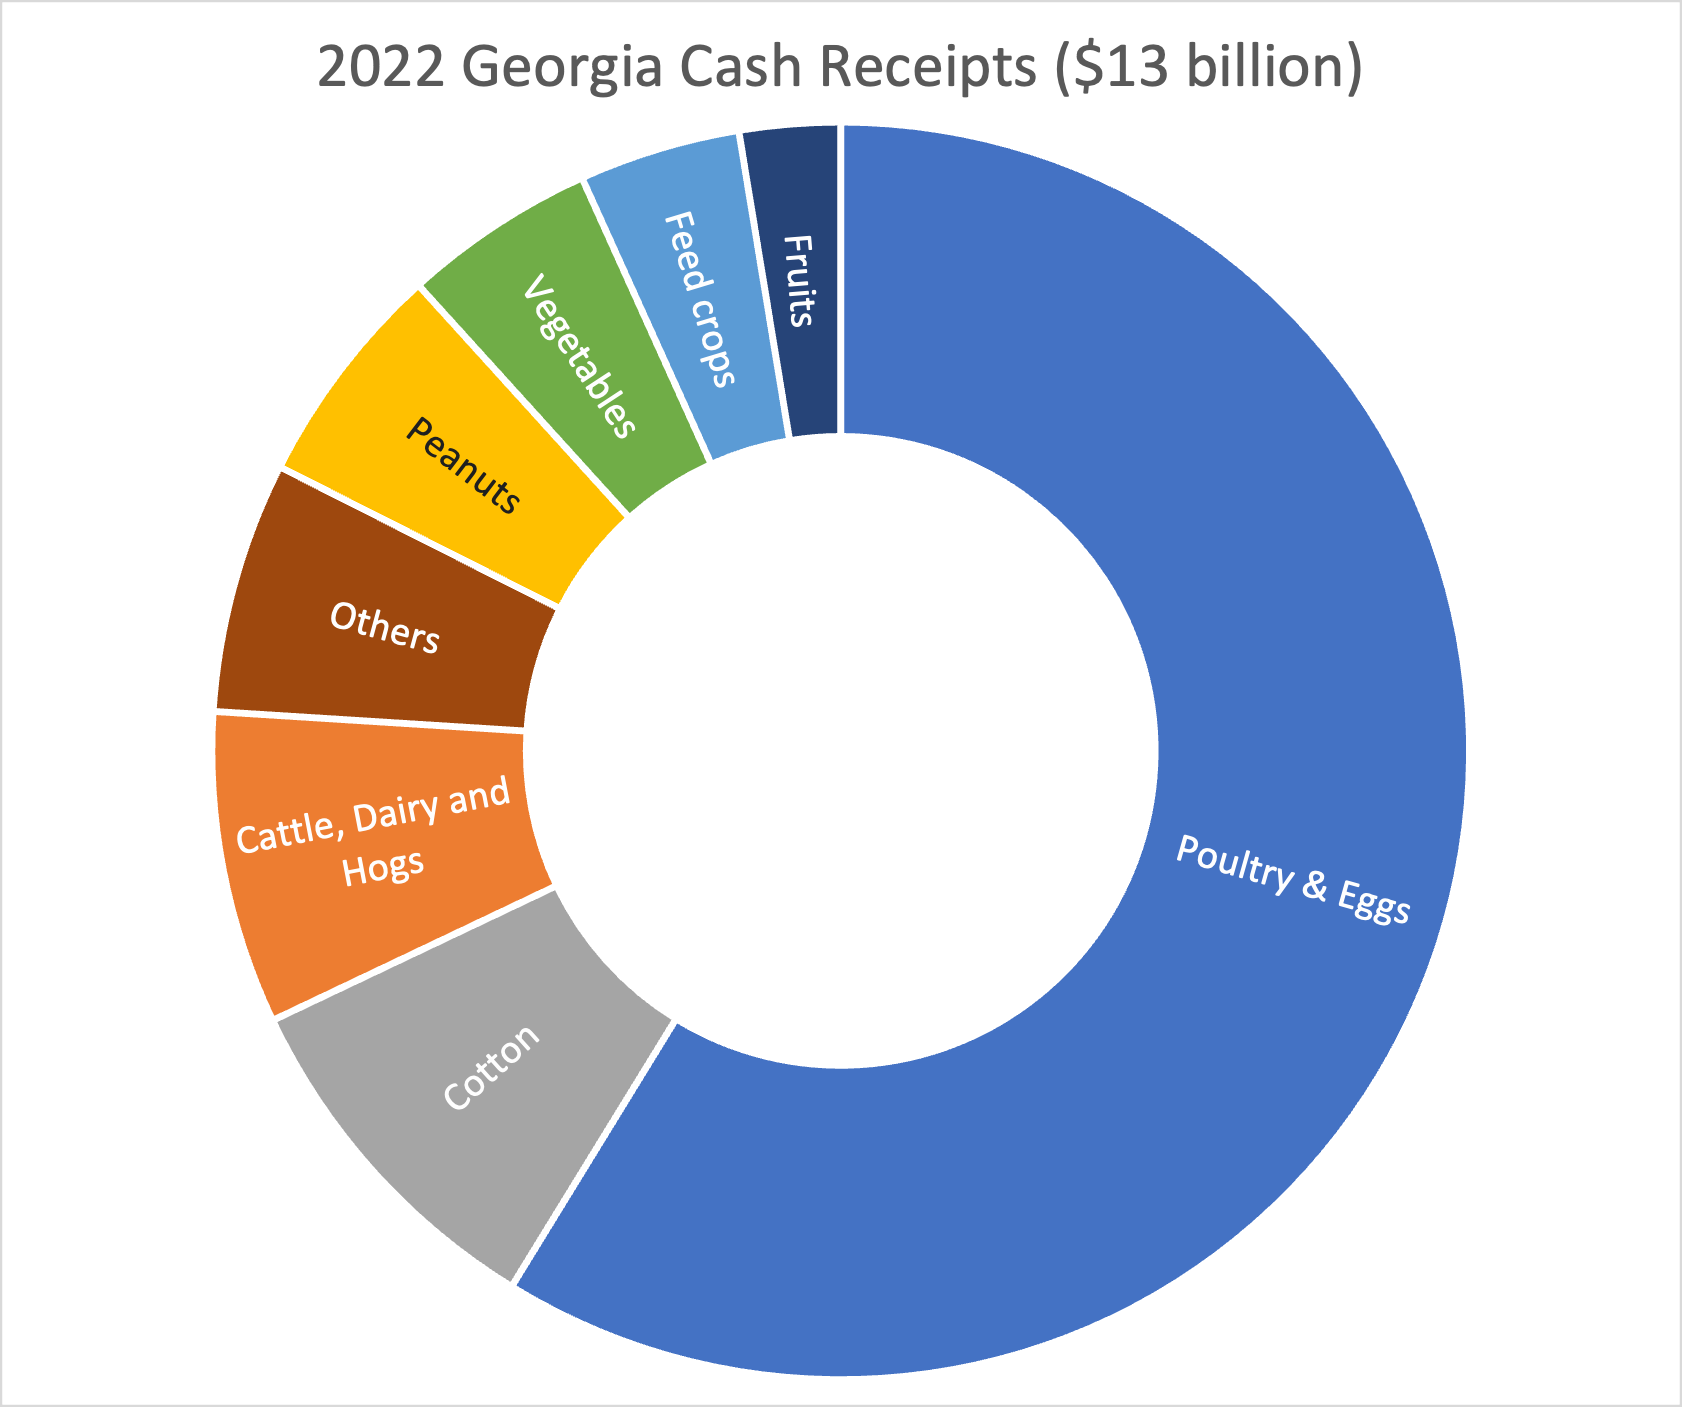 Georgia cash receipts by commodity show that the majority falls in the poultry and eggs category, with the remaining categories from largest to smallest including: cotton, cattle, dairy and hogs (these two being of similar size, about 10% of the total each), other combined commodities, peanuts, veggies, feed crops and fruits.